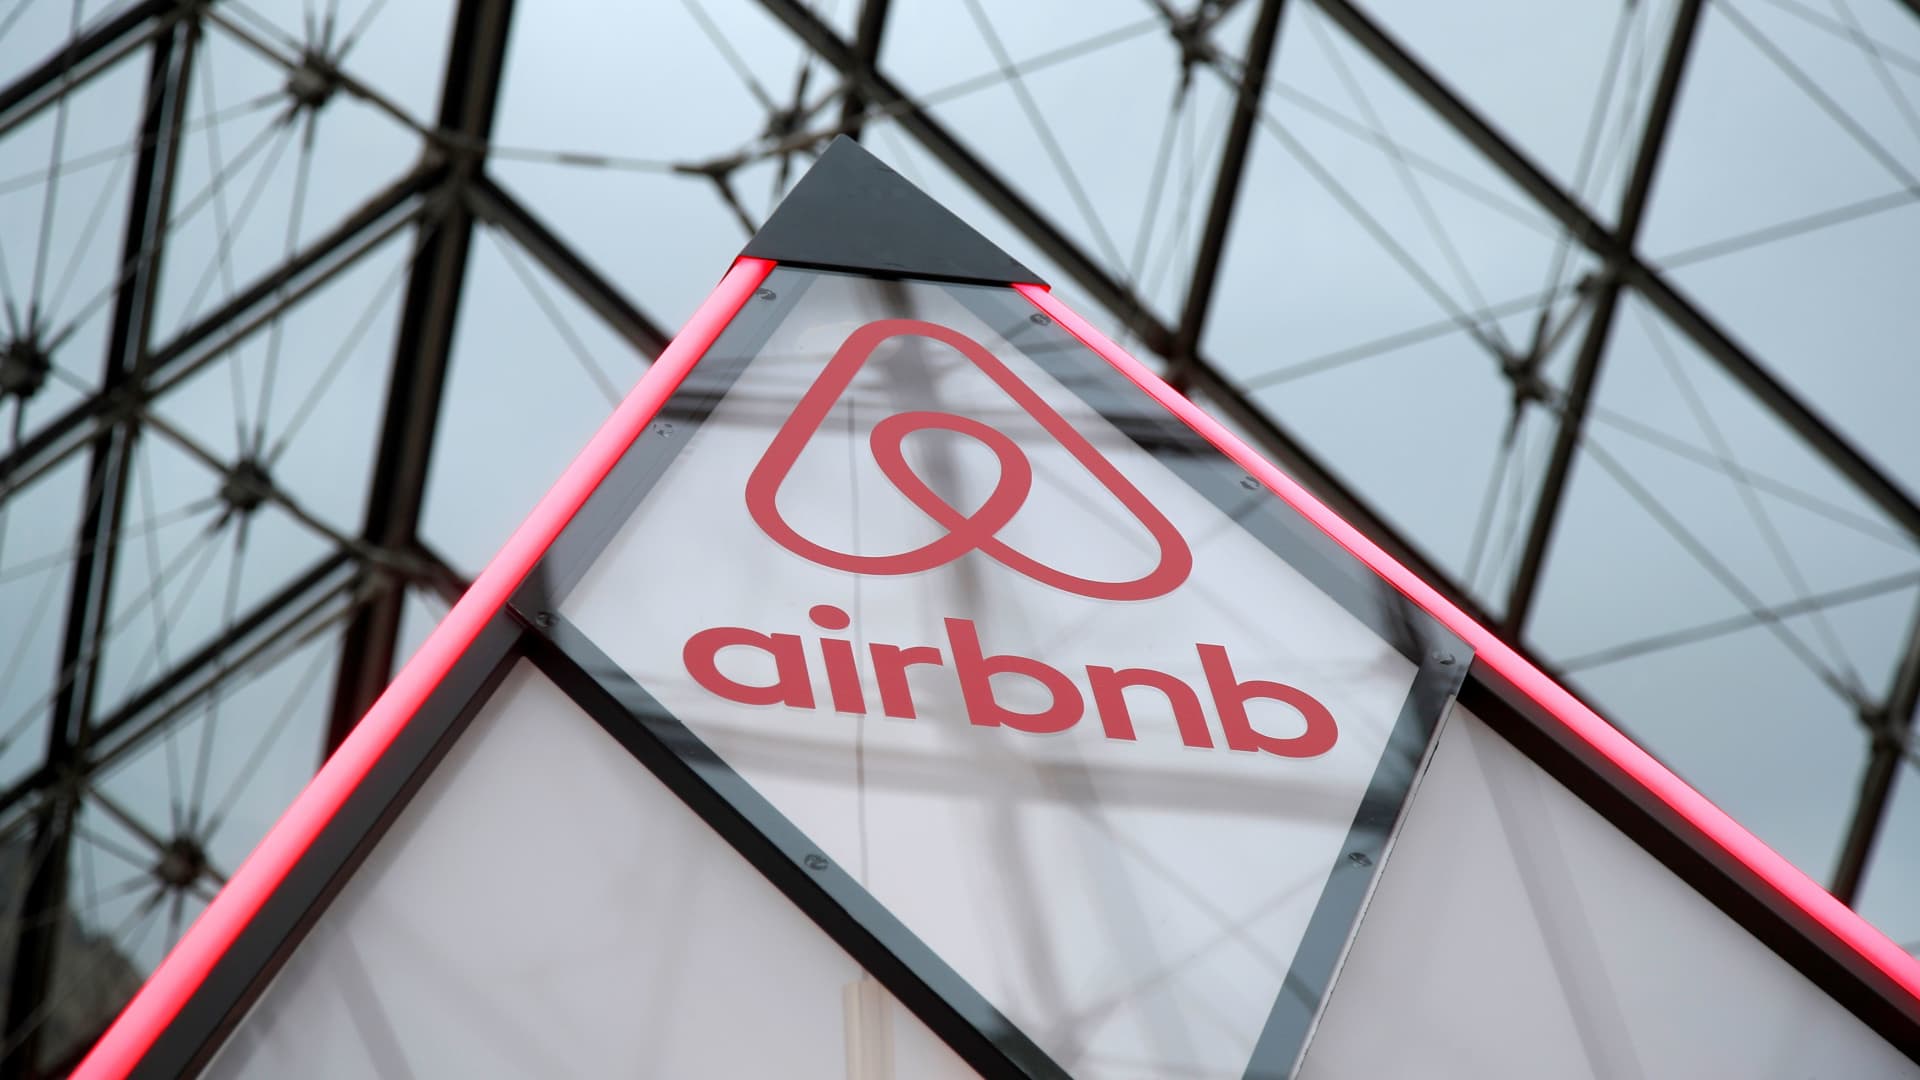 Airbnb is making a simple, but big booking change bringing it closer to hotel check-in